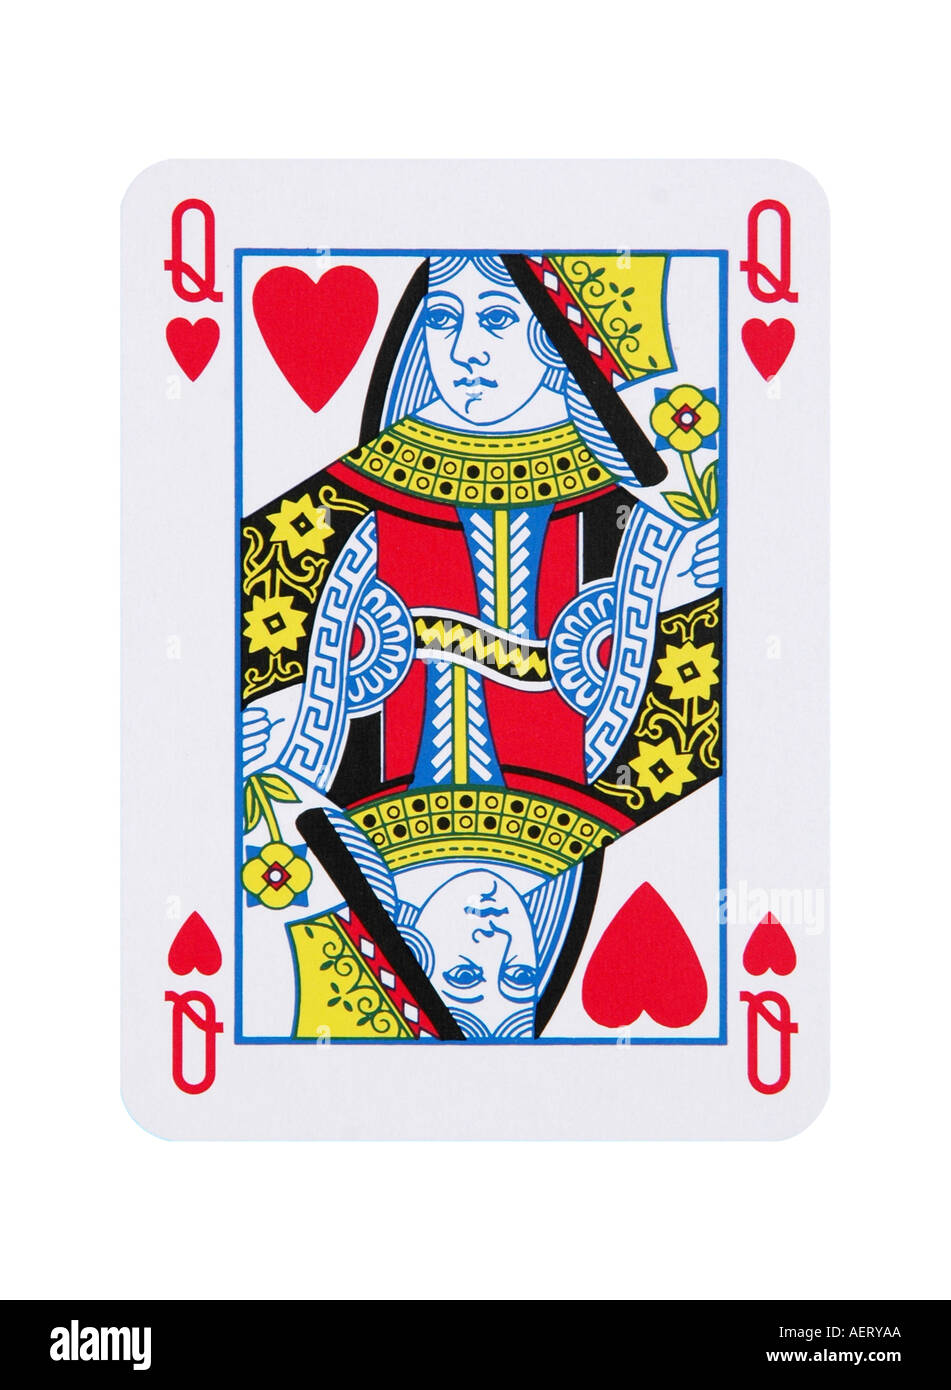 Queen of hearts card Stock Photo - Alamy